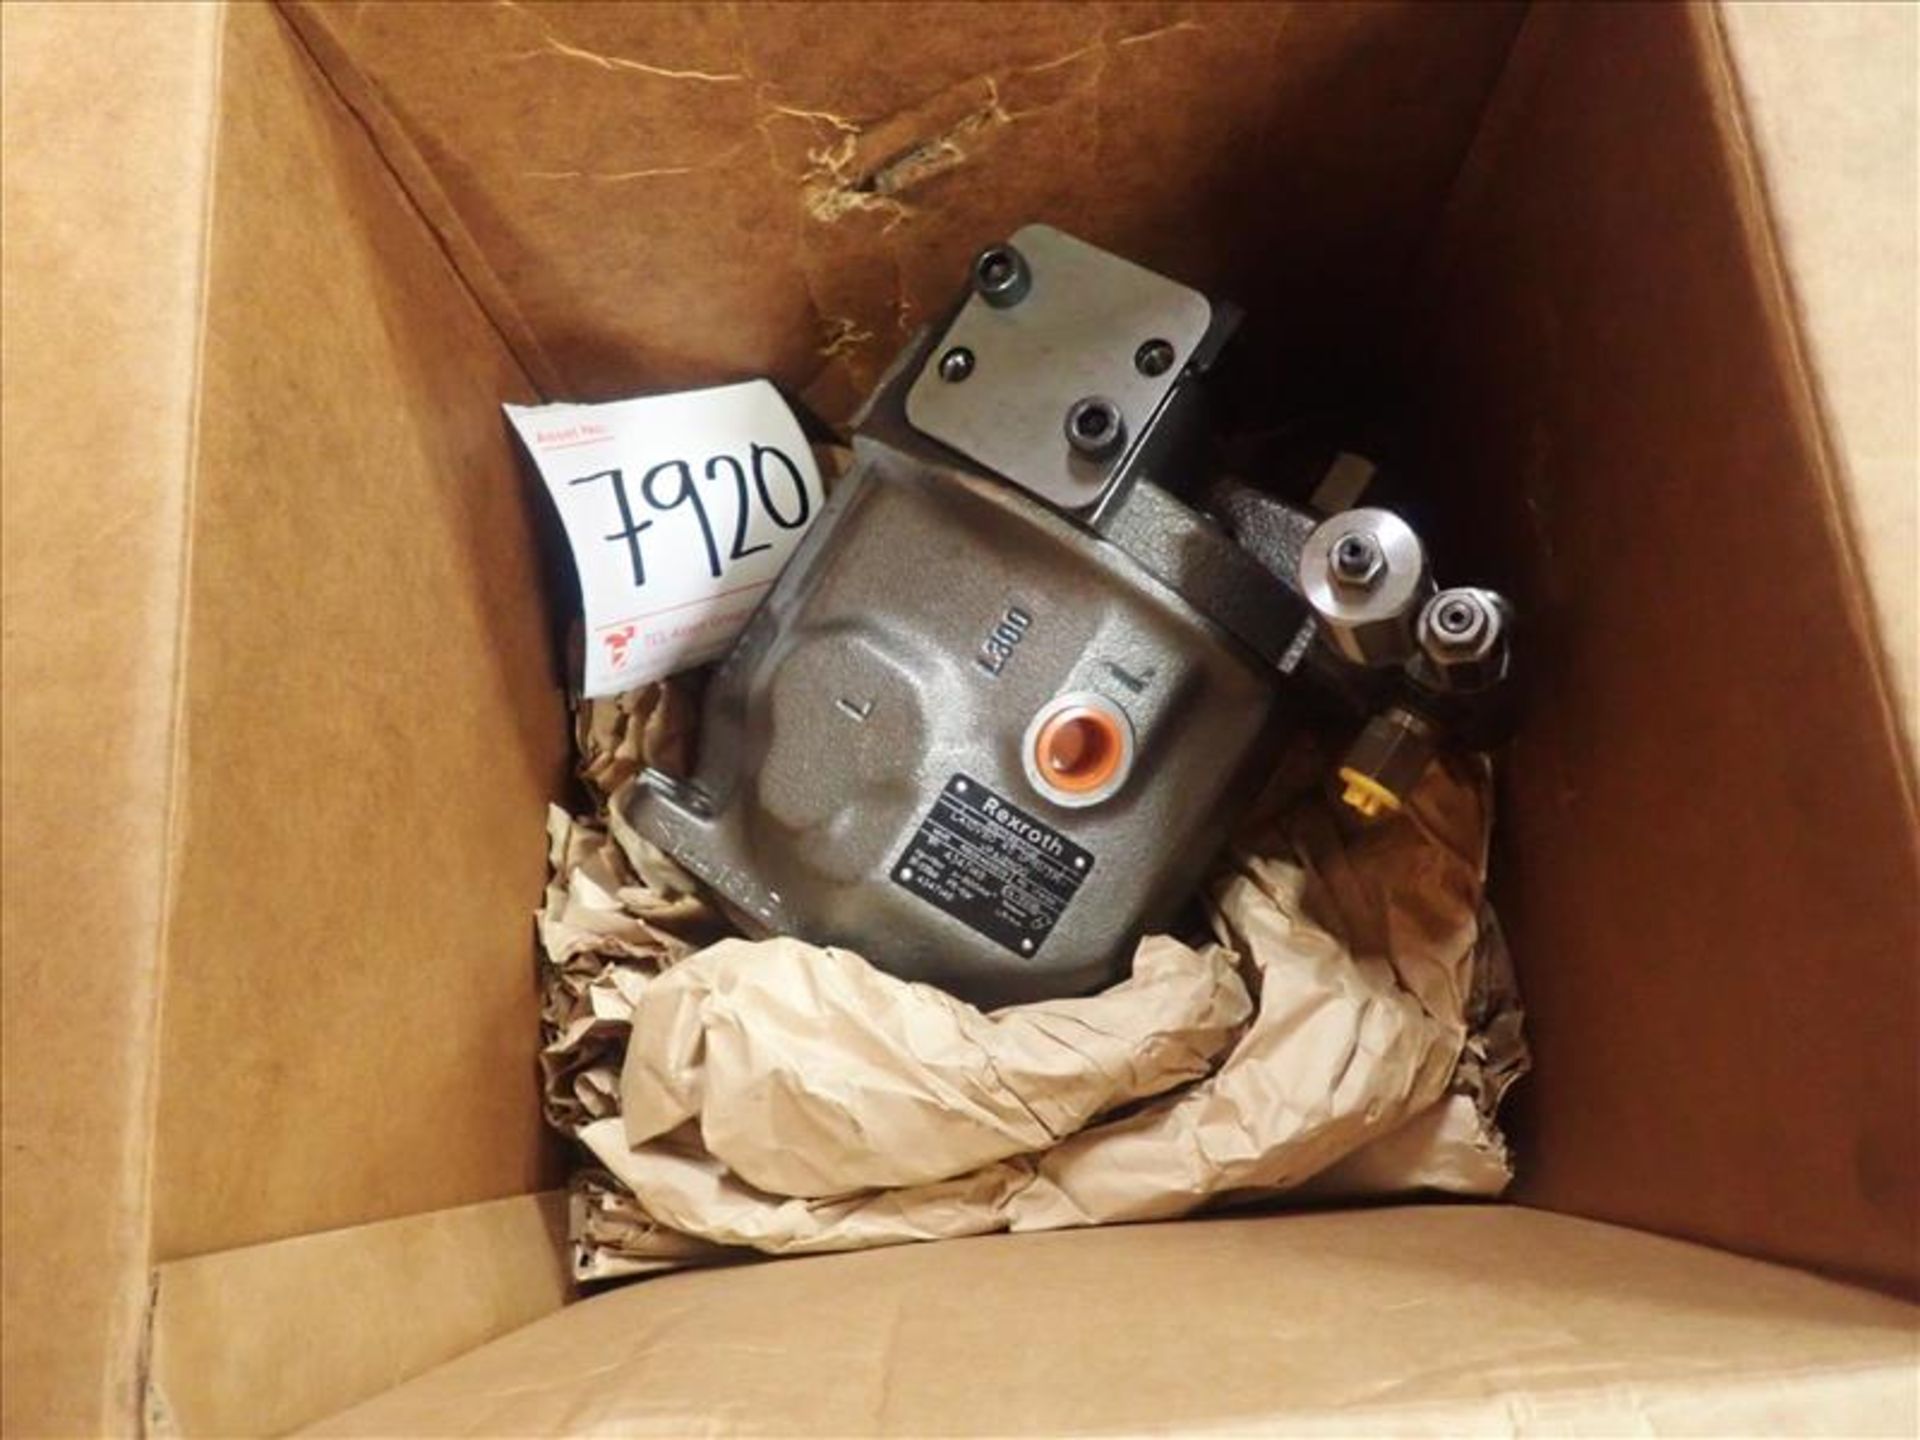 Rexroth gearbox (Tag 7920 Loc WH South)